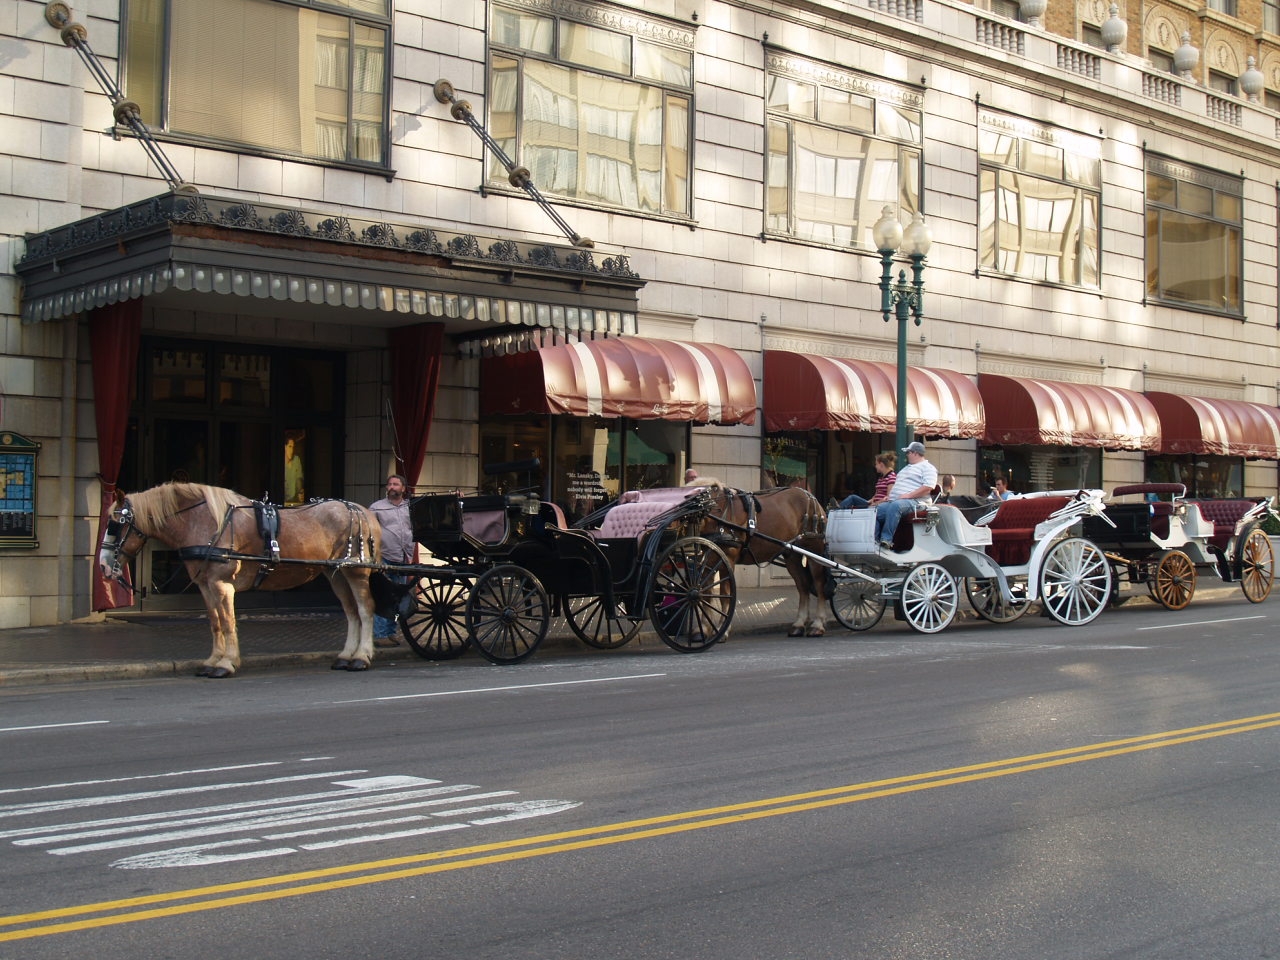 [Horse+Carriages+at+the+Peabody.JPG]